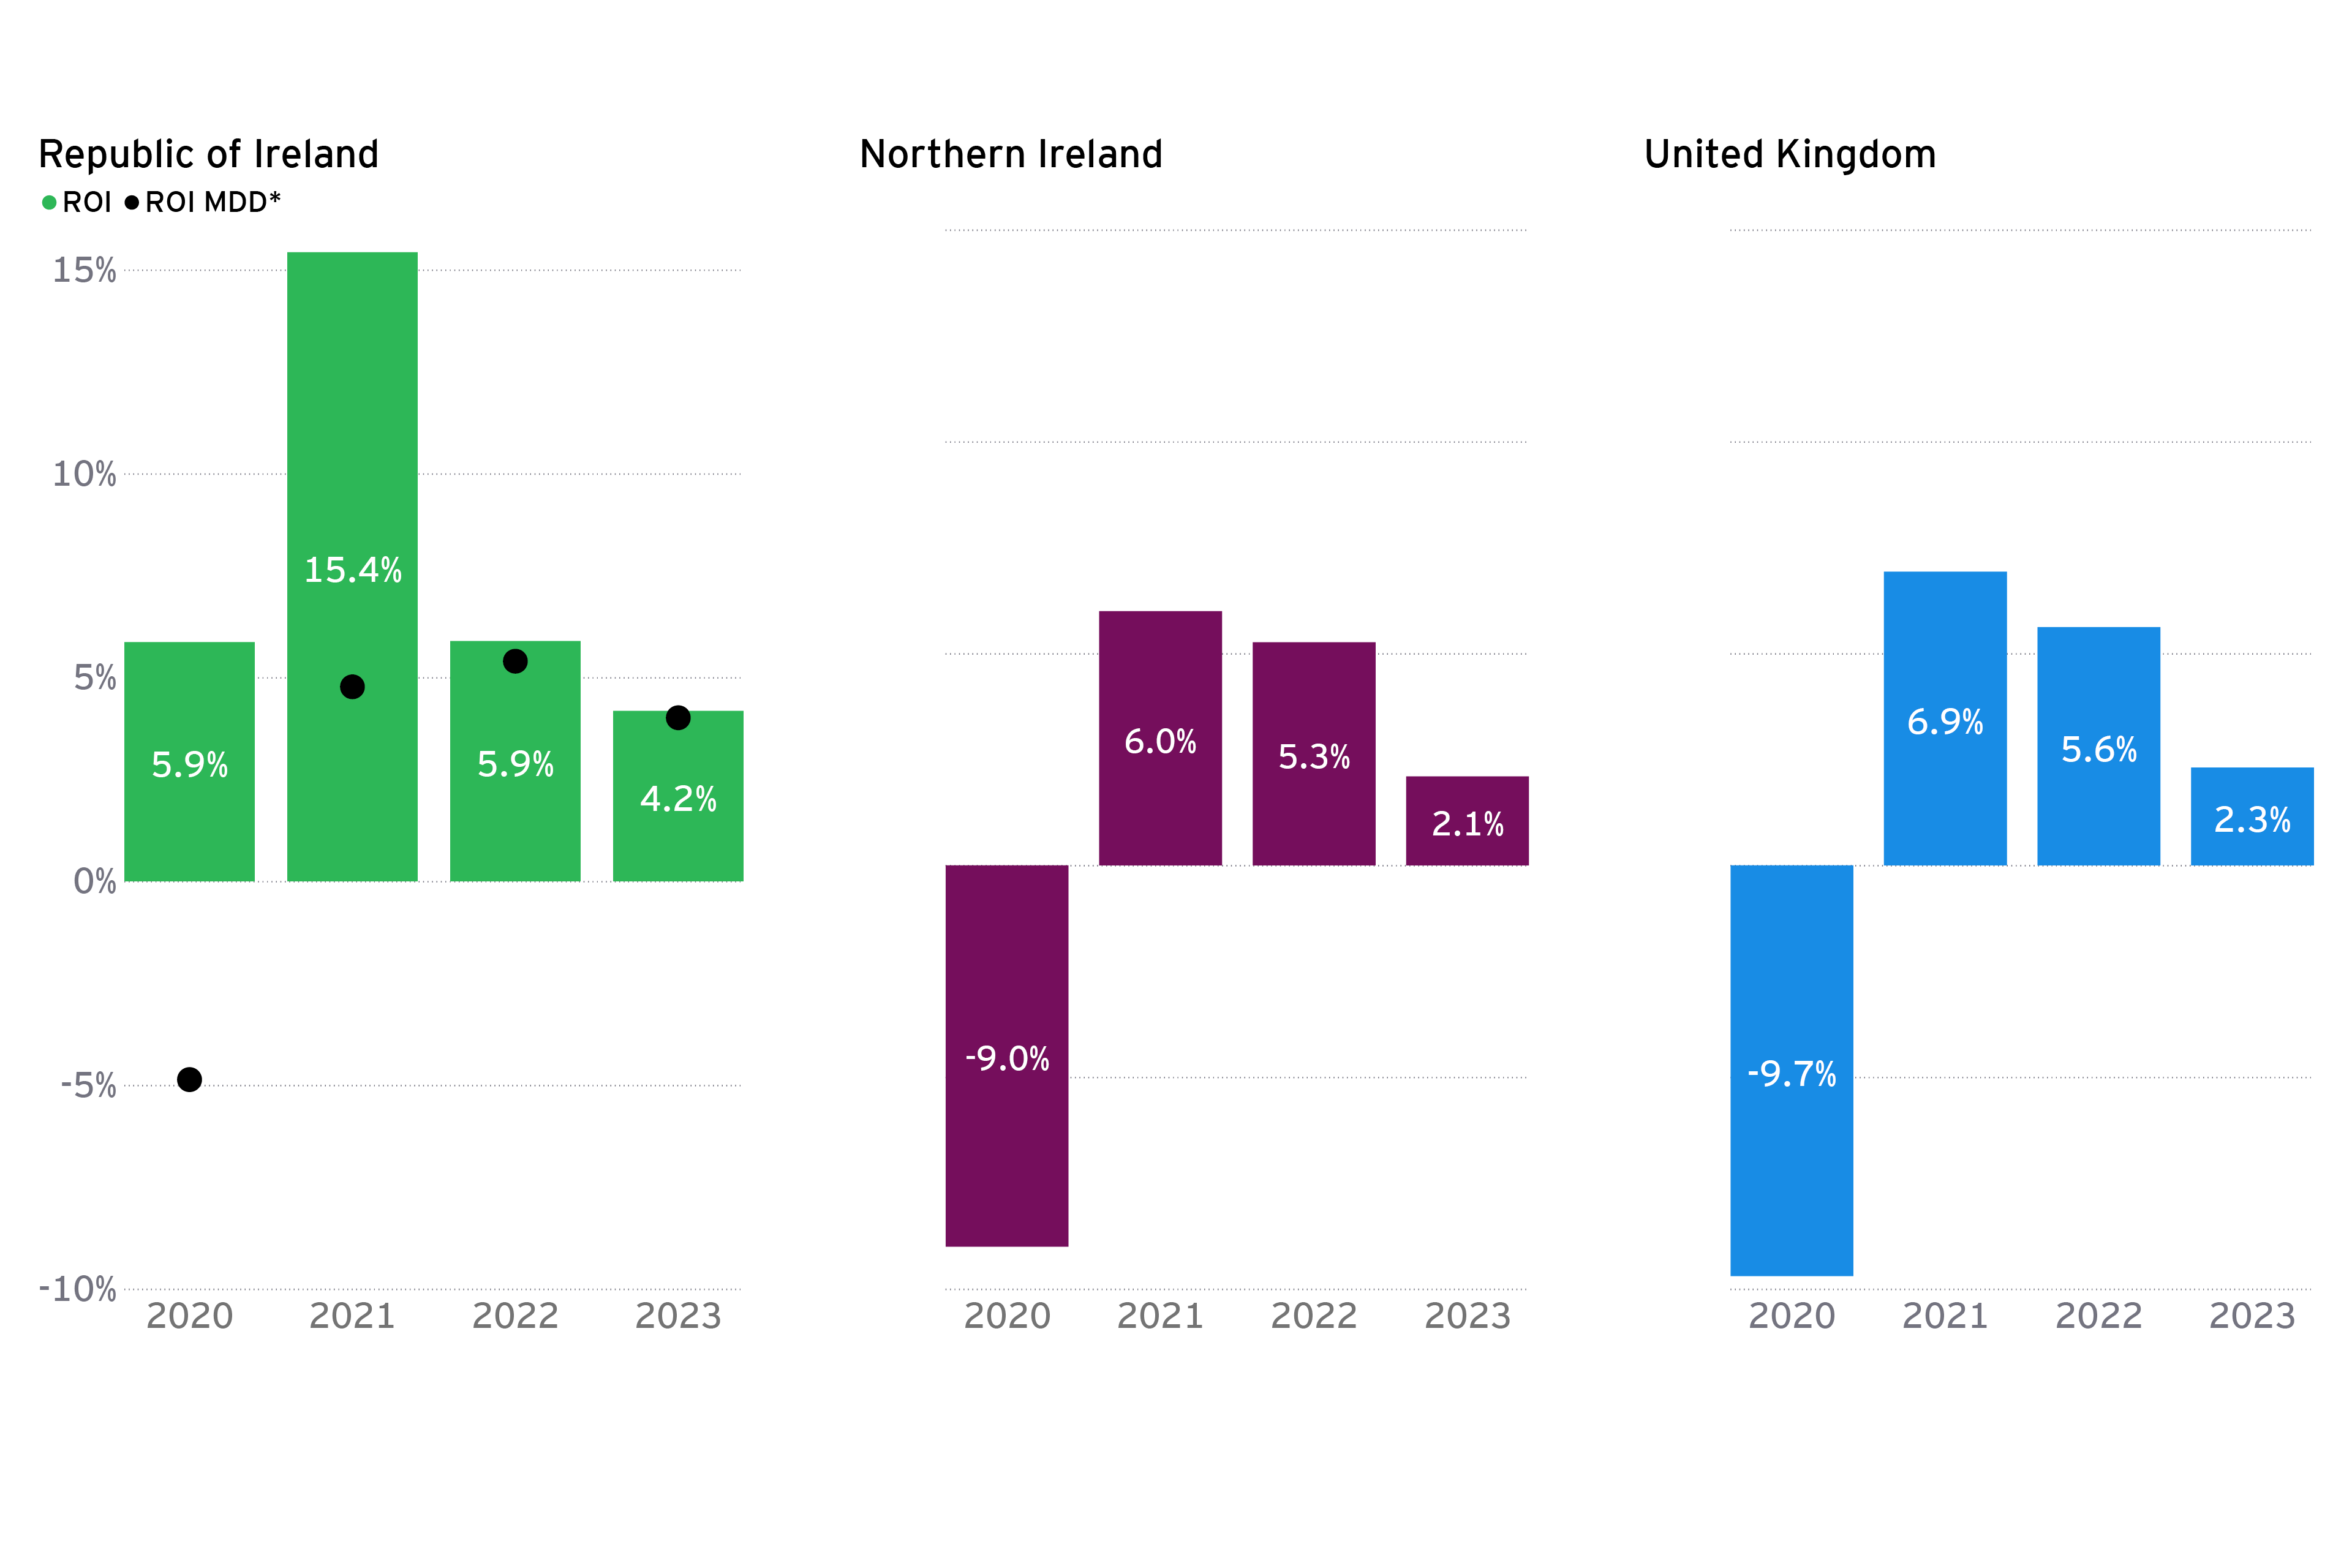 EY growth forecasts for ROI, NI and UK (2020-2023)